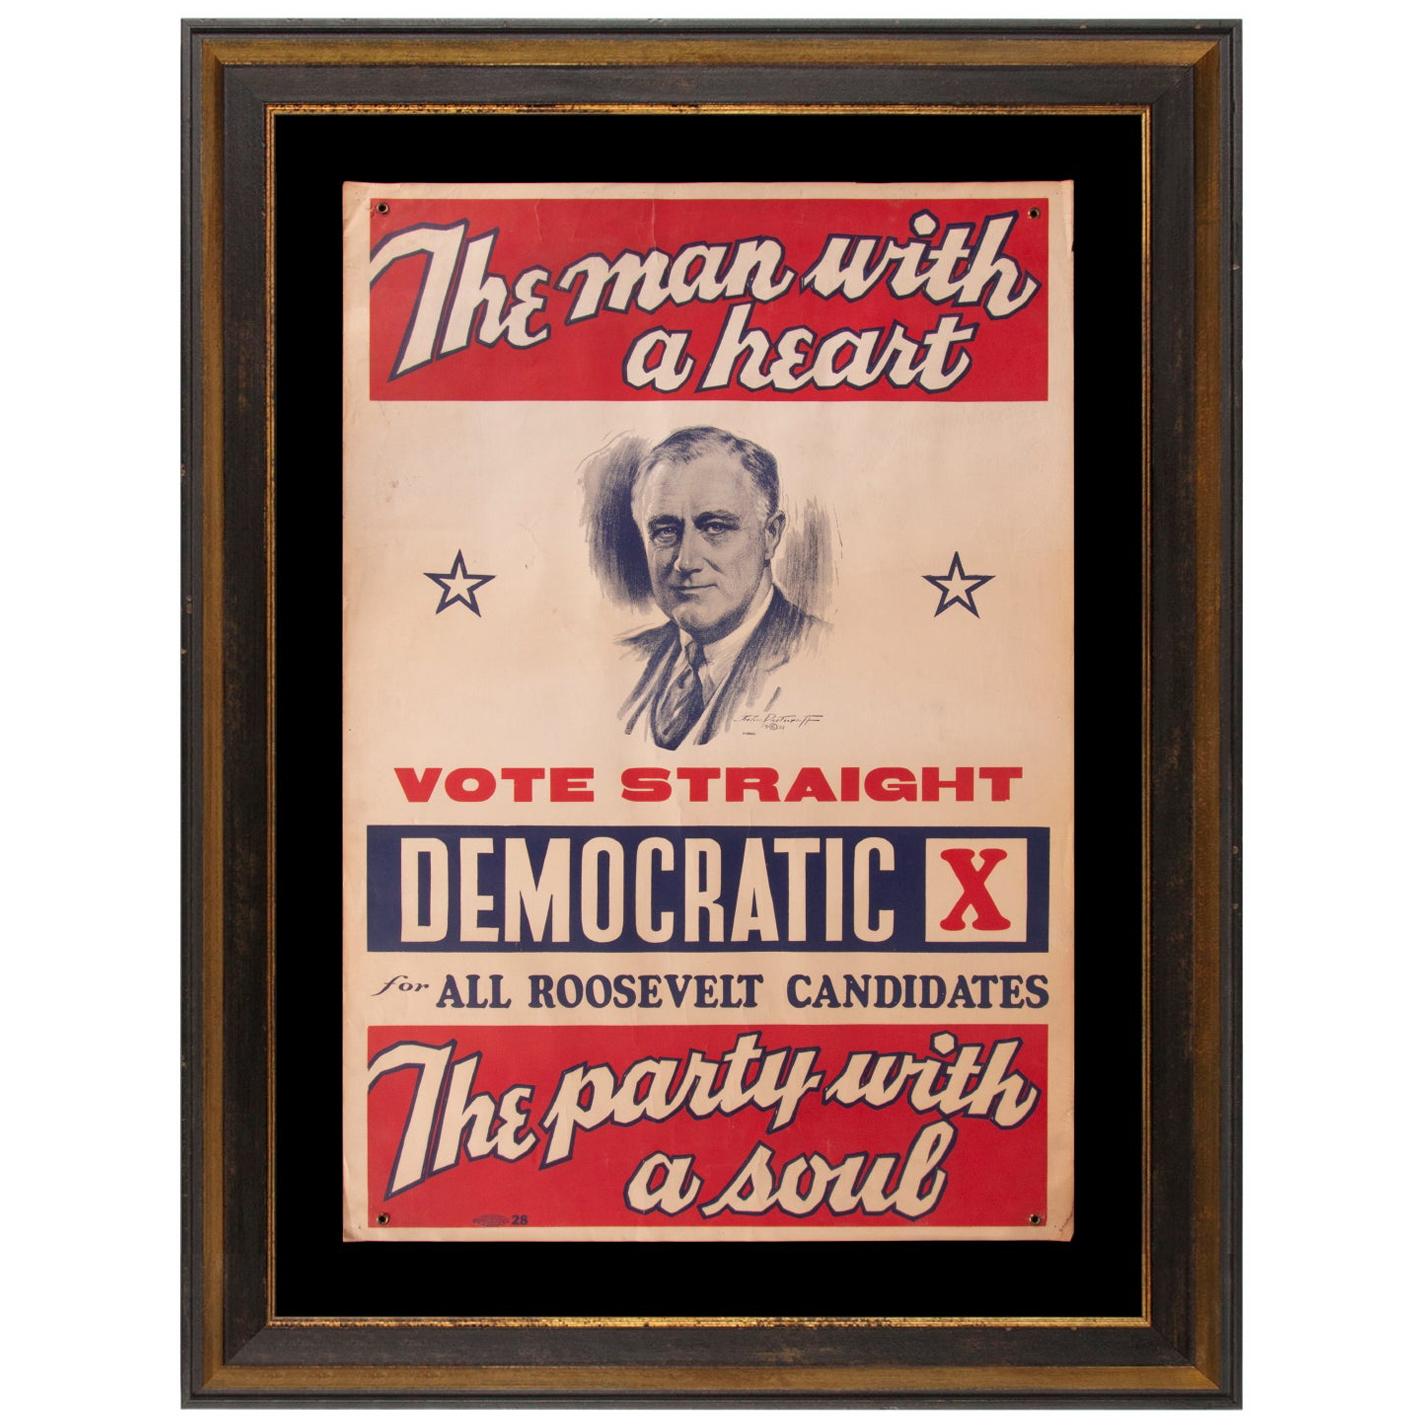 Franklin D. Roosevelt 1936 Campaign Poster:  "The Man with a Heart..."